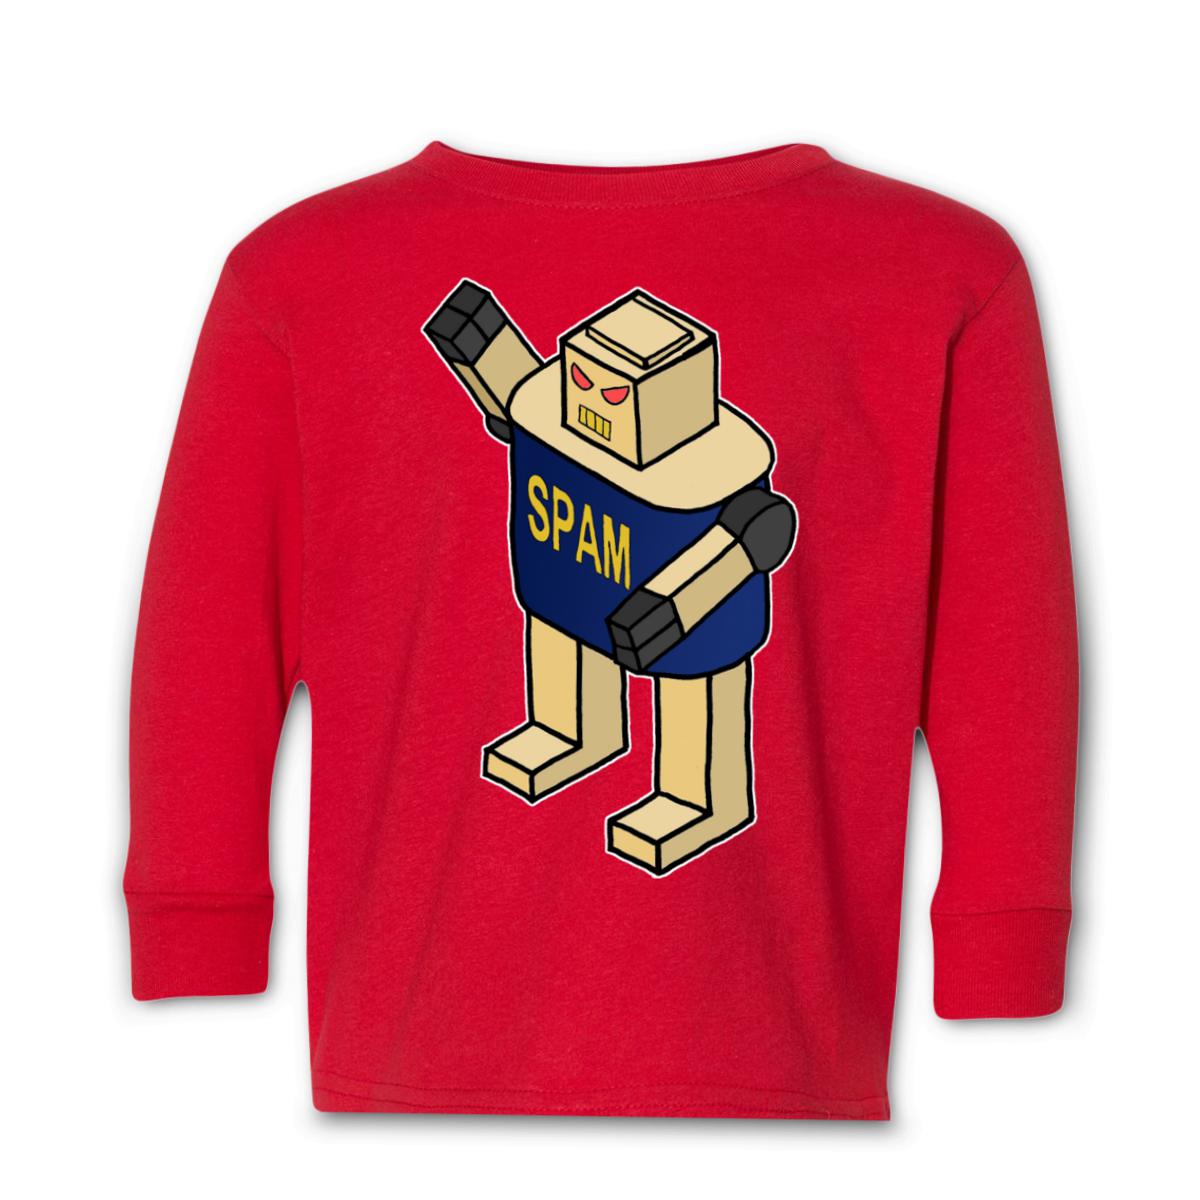 Spam Bot Toddler Long Sleeve Tee 56T red